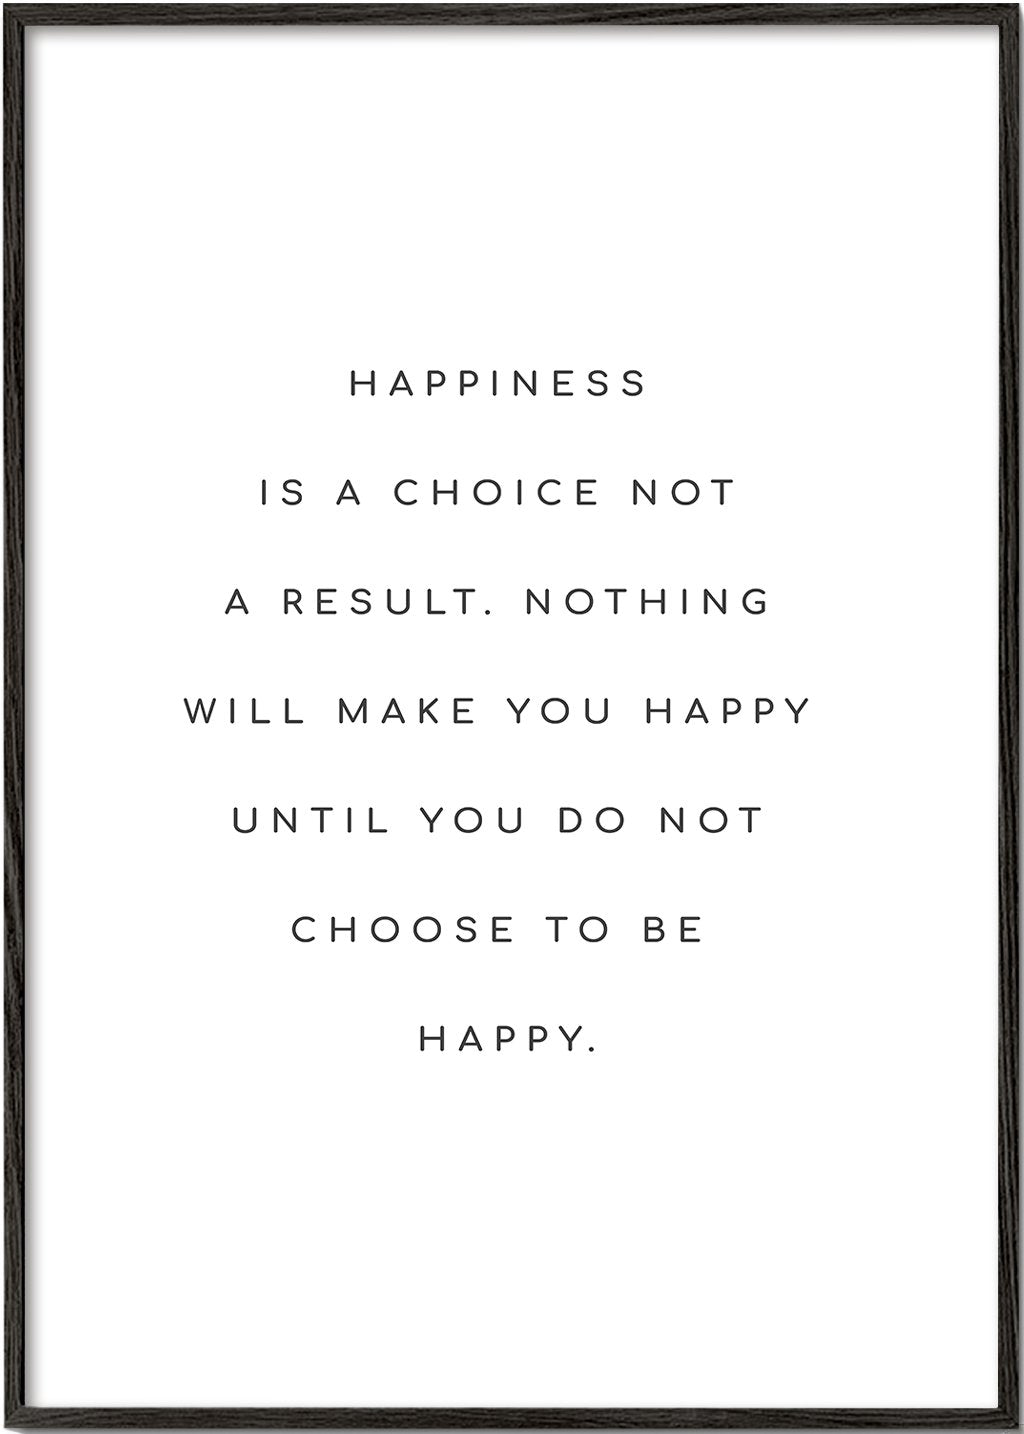 Happiness meaning quote